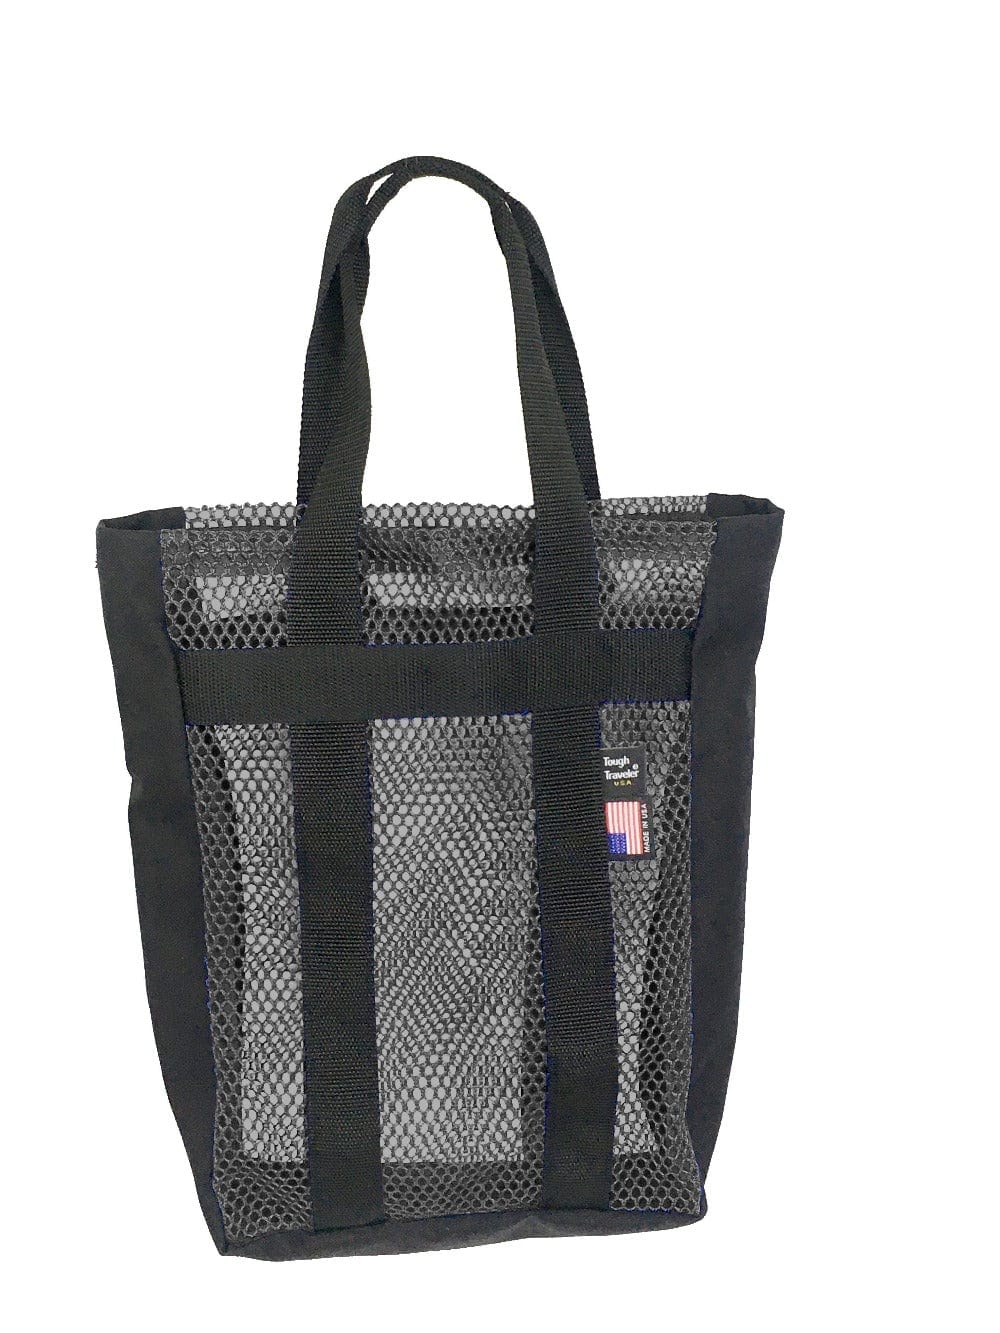 Mesh Beach Bags And Beach Totes - Good Gifts For Boat Owners